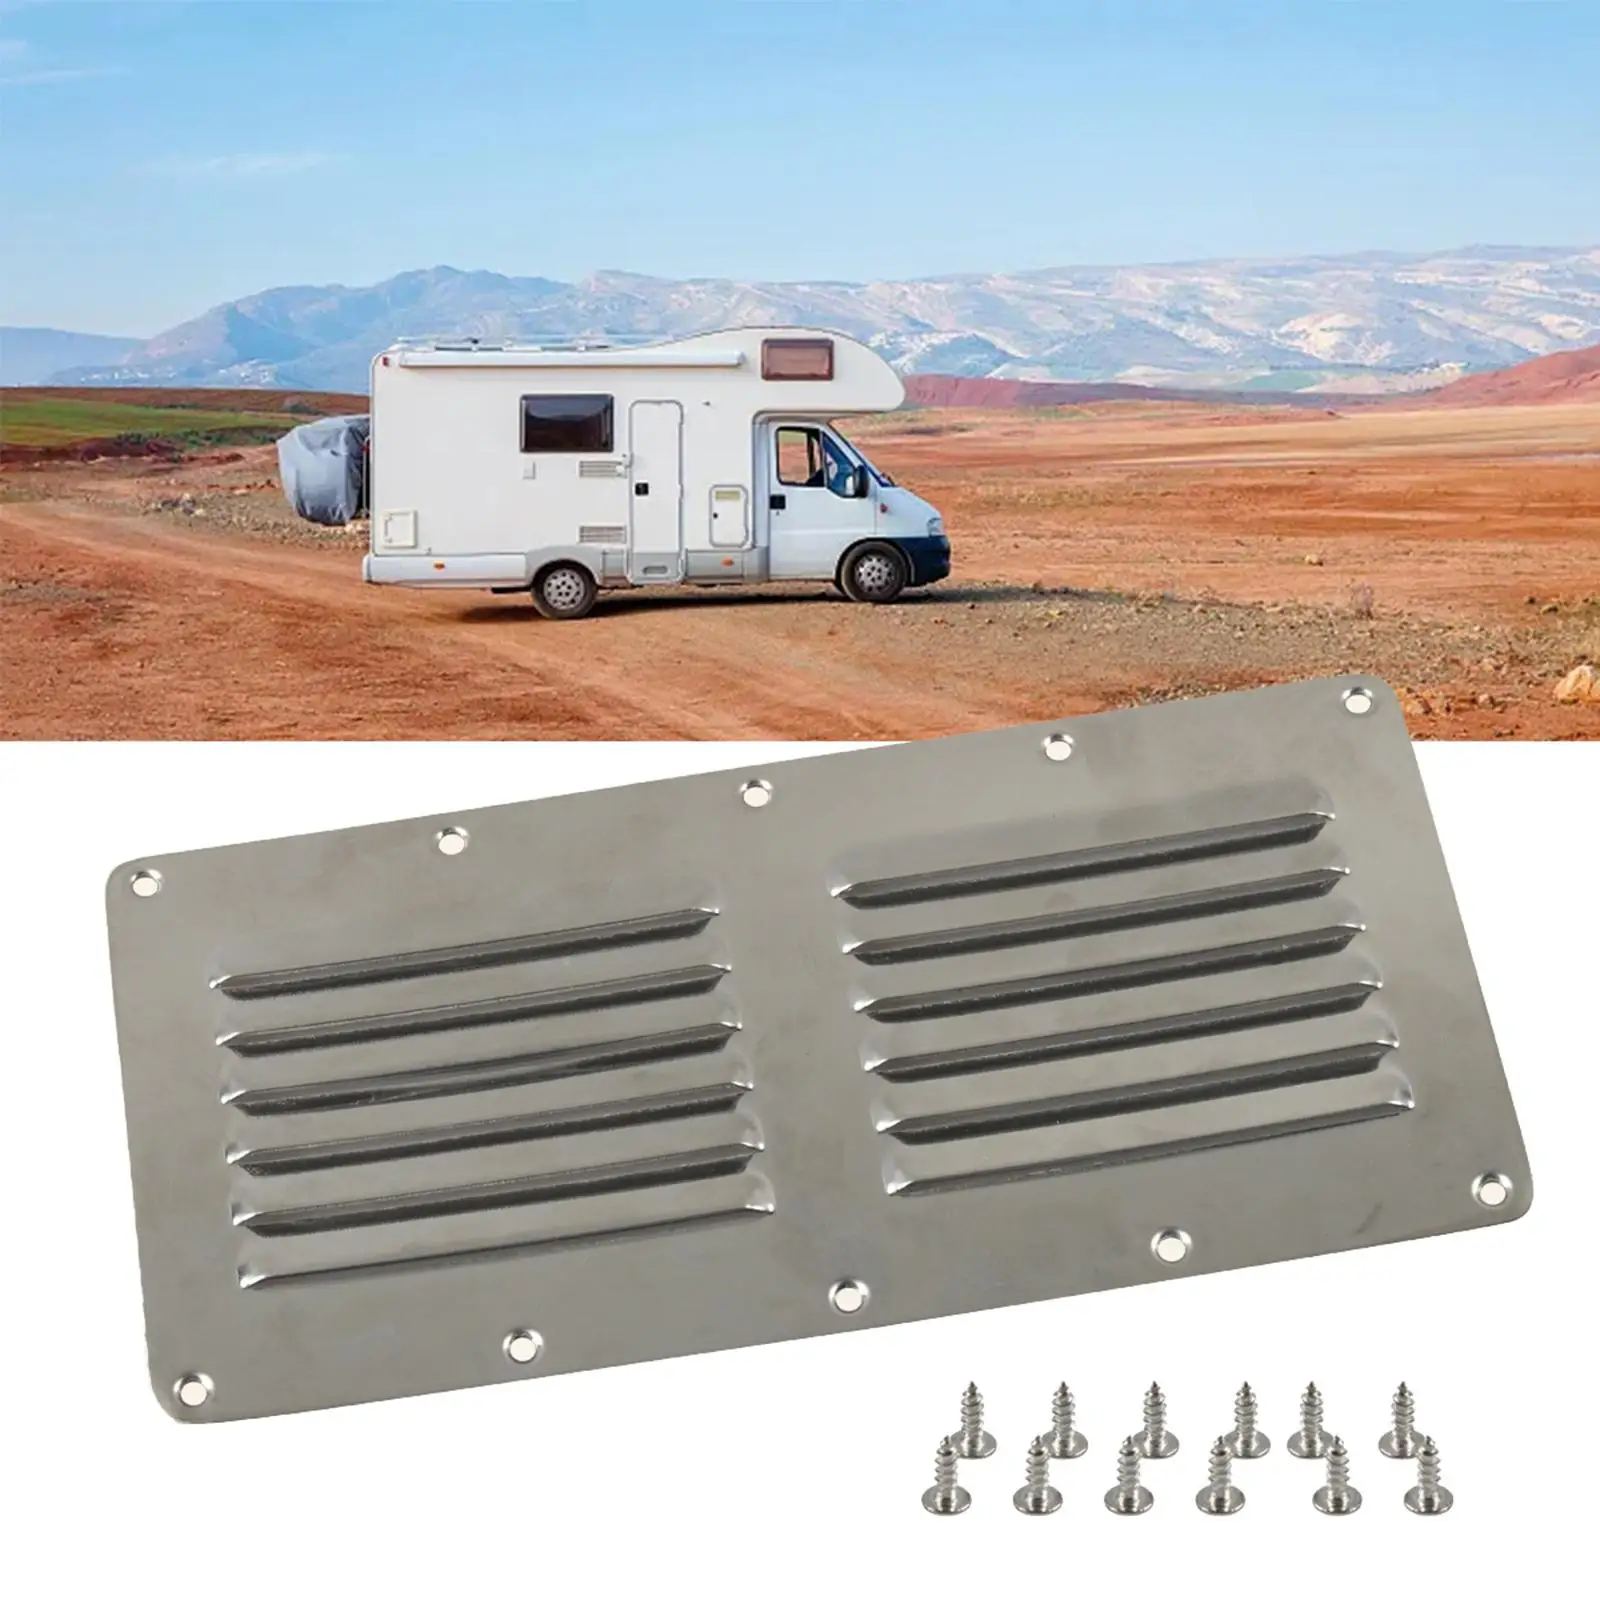 Boat Louver Vent Polished Stable Performance Direct Replaces Erosion Resistant Parts Stainless Steel Accessory for Boat RV